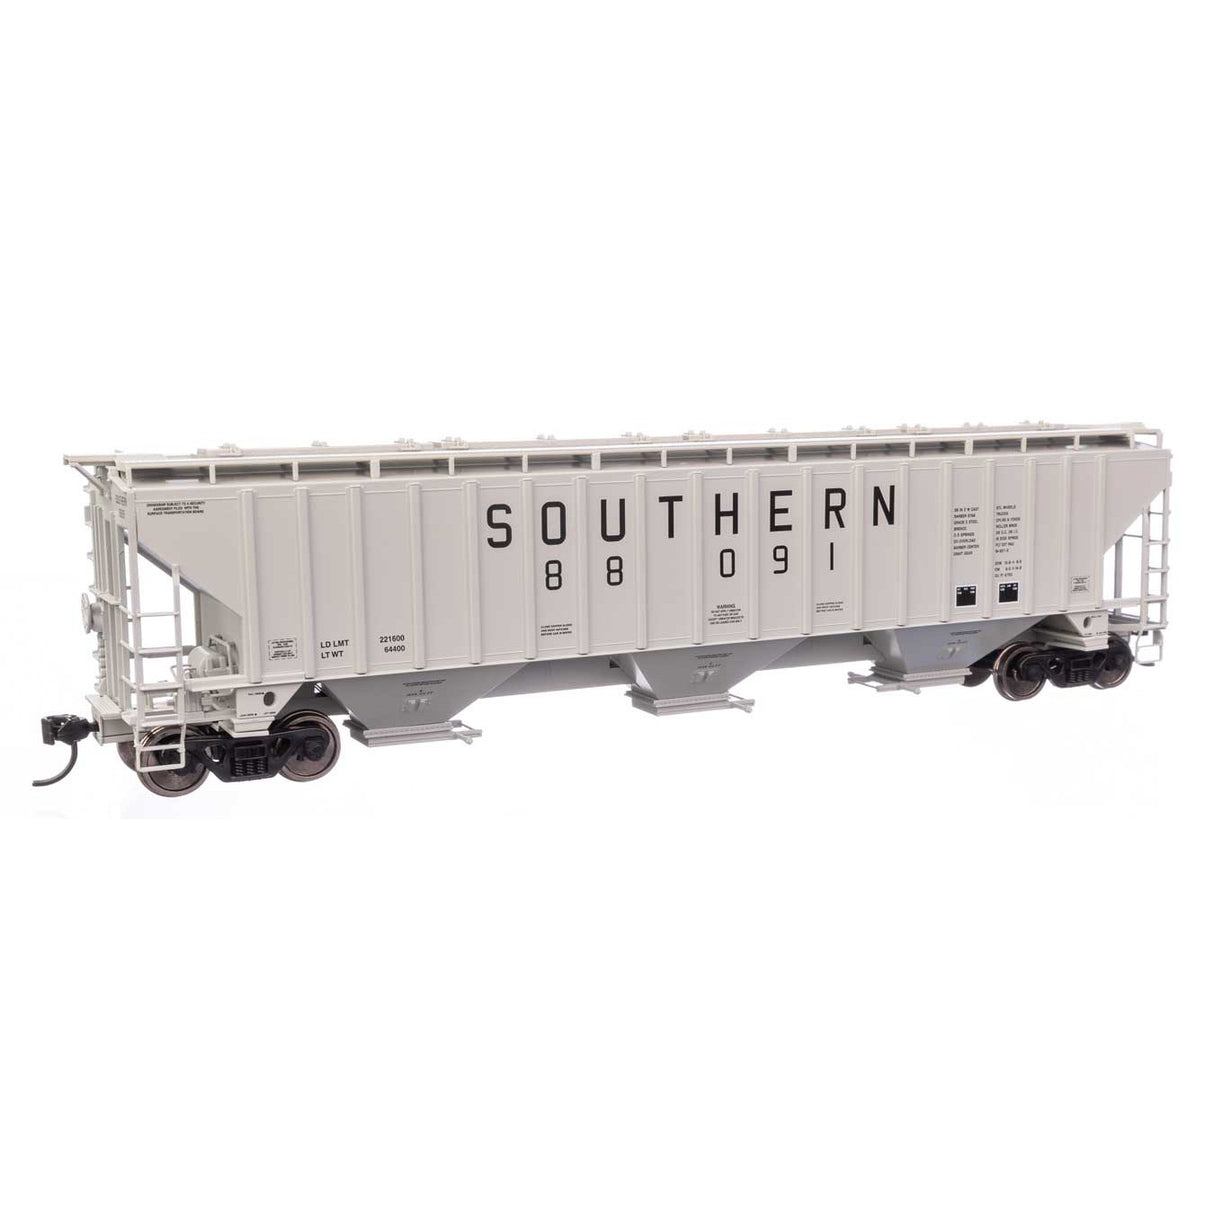 Walthers Mainline HO Scale Southern 88091 Trinity 4750 Covered Hopper